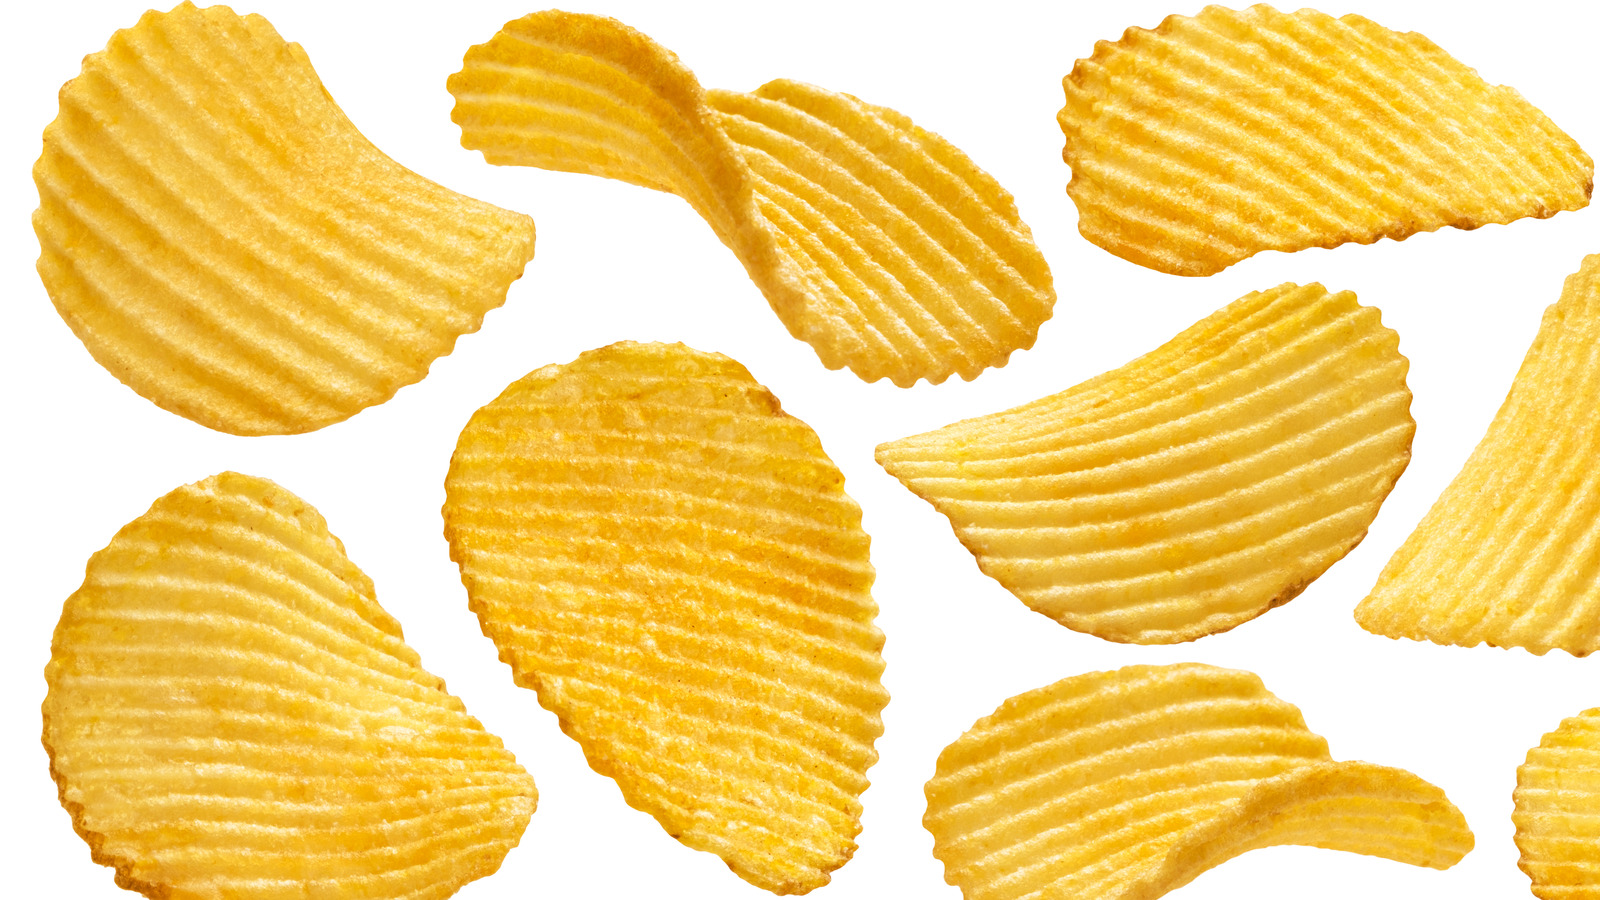 Mashed Exclusive Poll Uncovers Fans' Favorite Brand Of Potato Chips